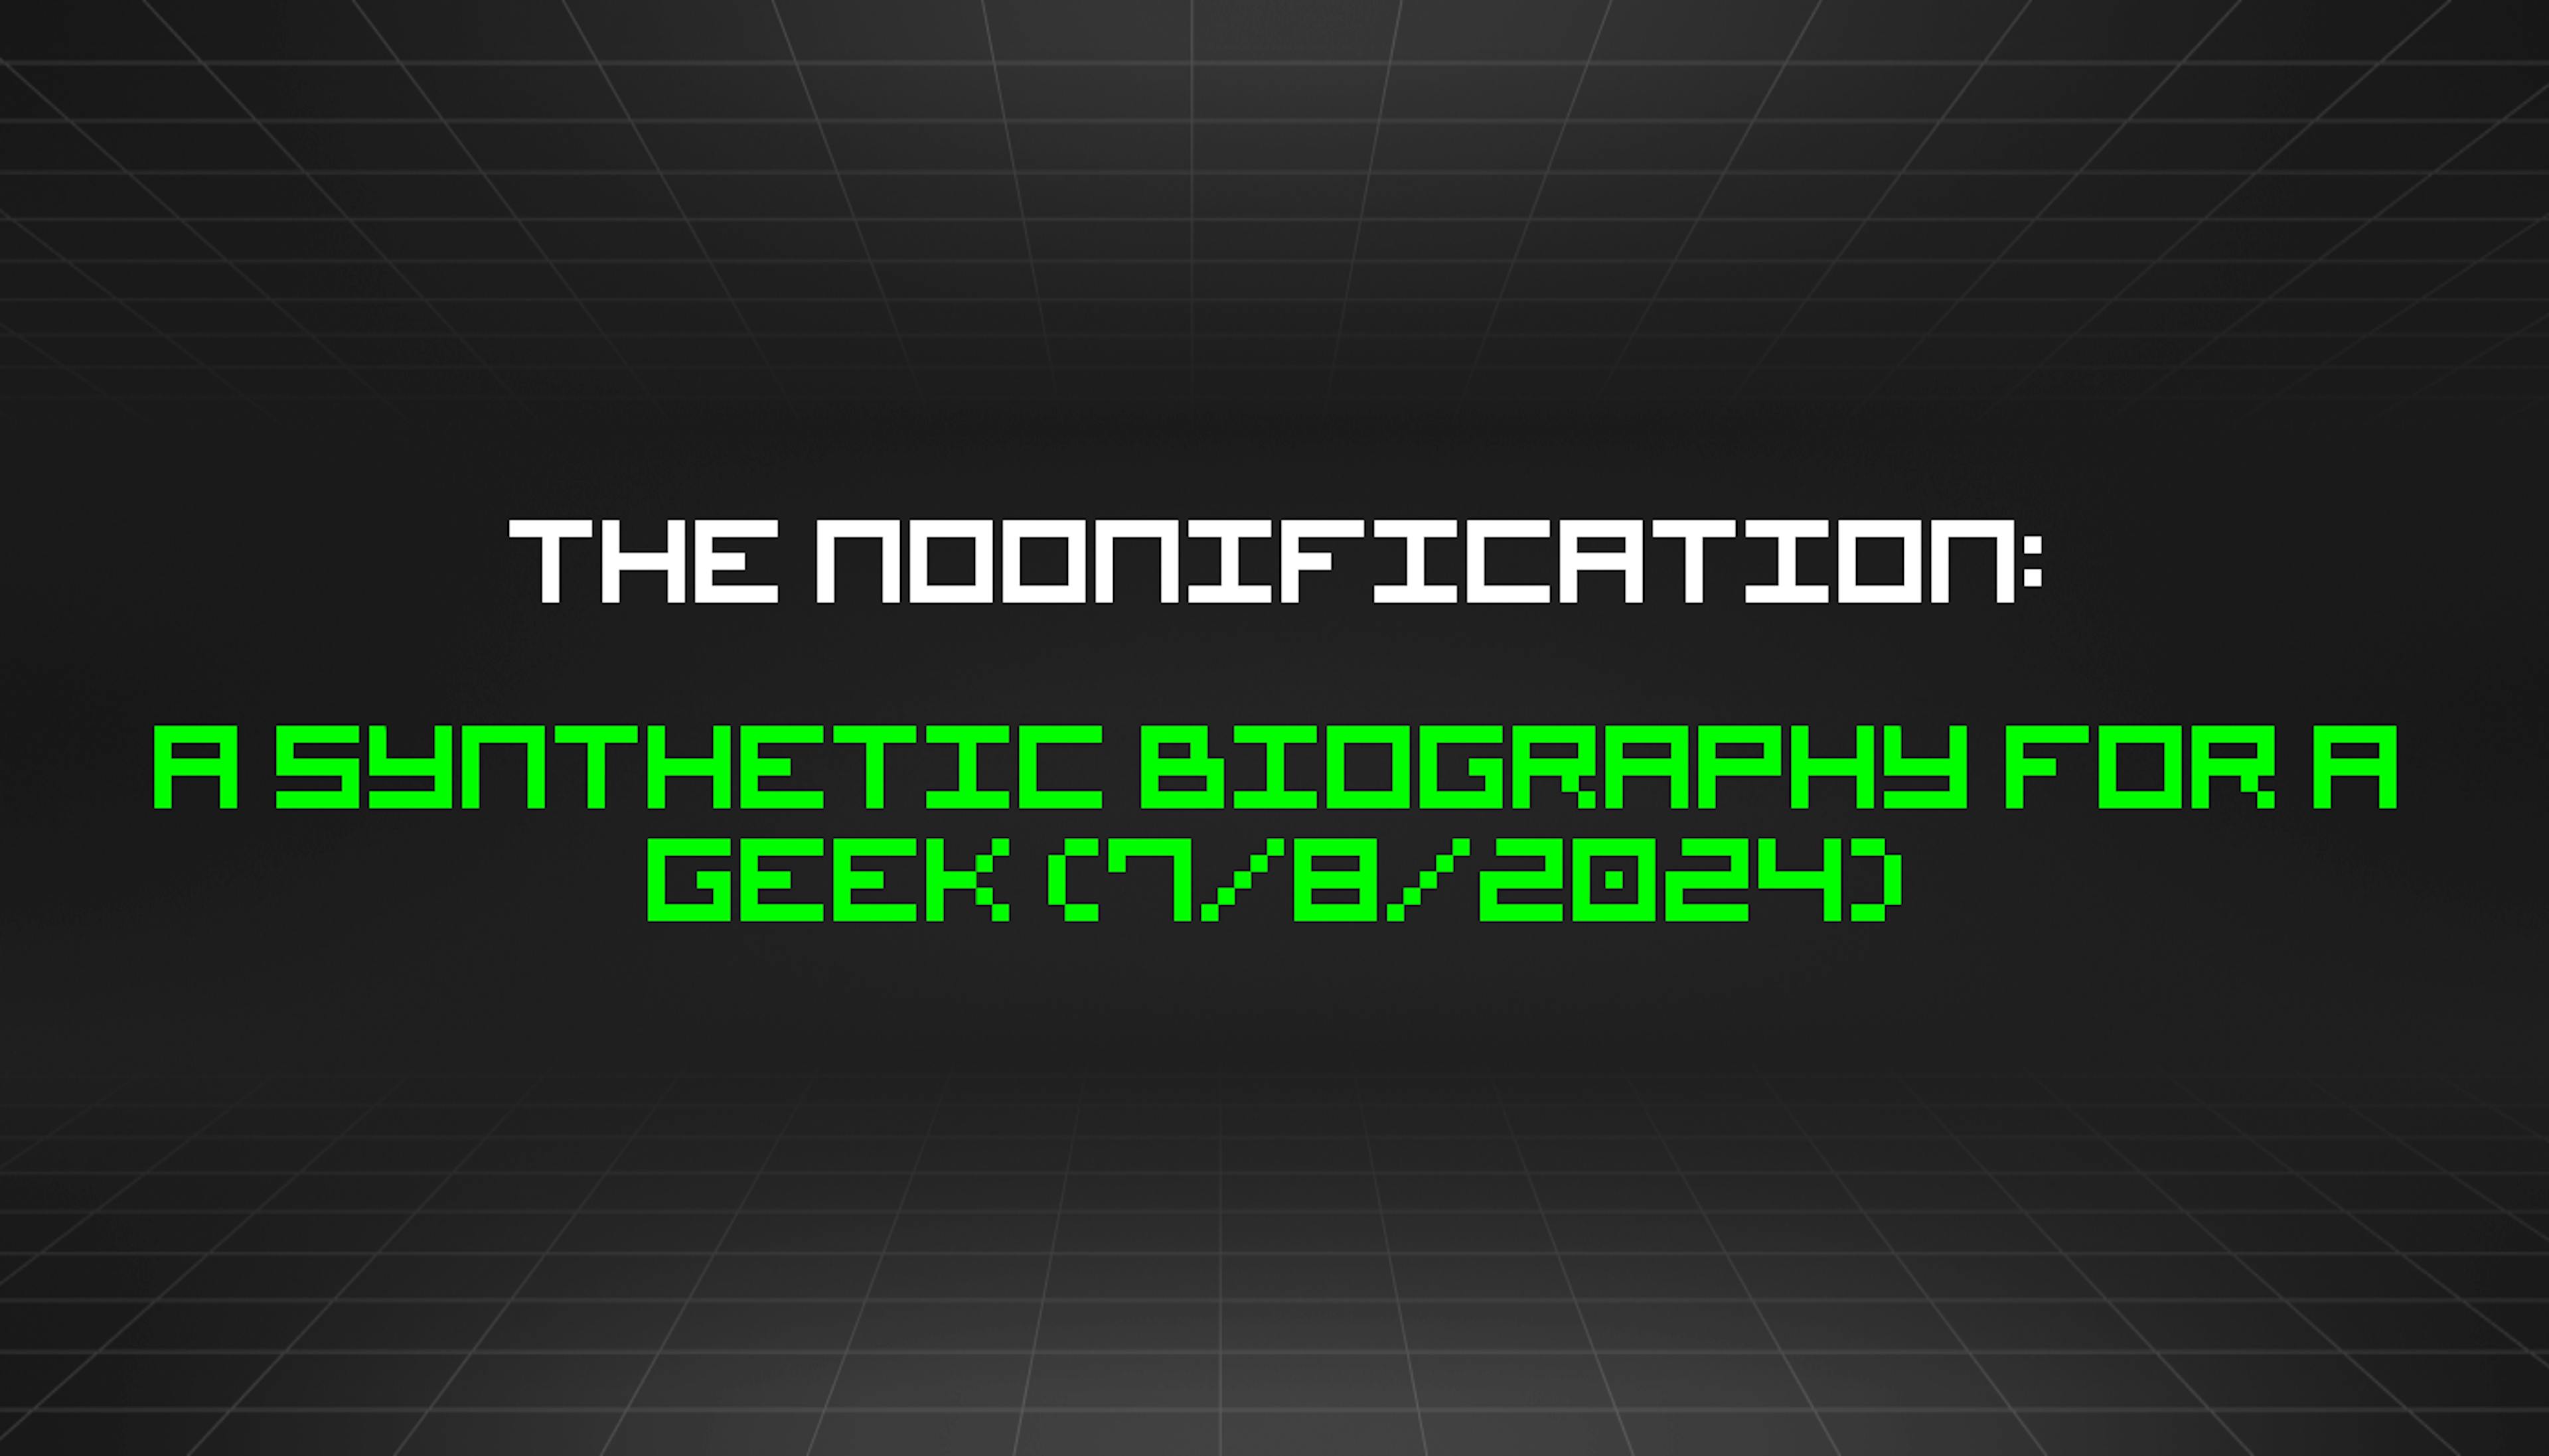 featured image - The Noonification: A Synthetic Biography for a Geek (7/8/2024)